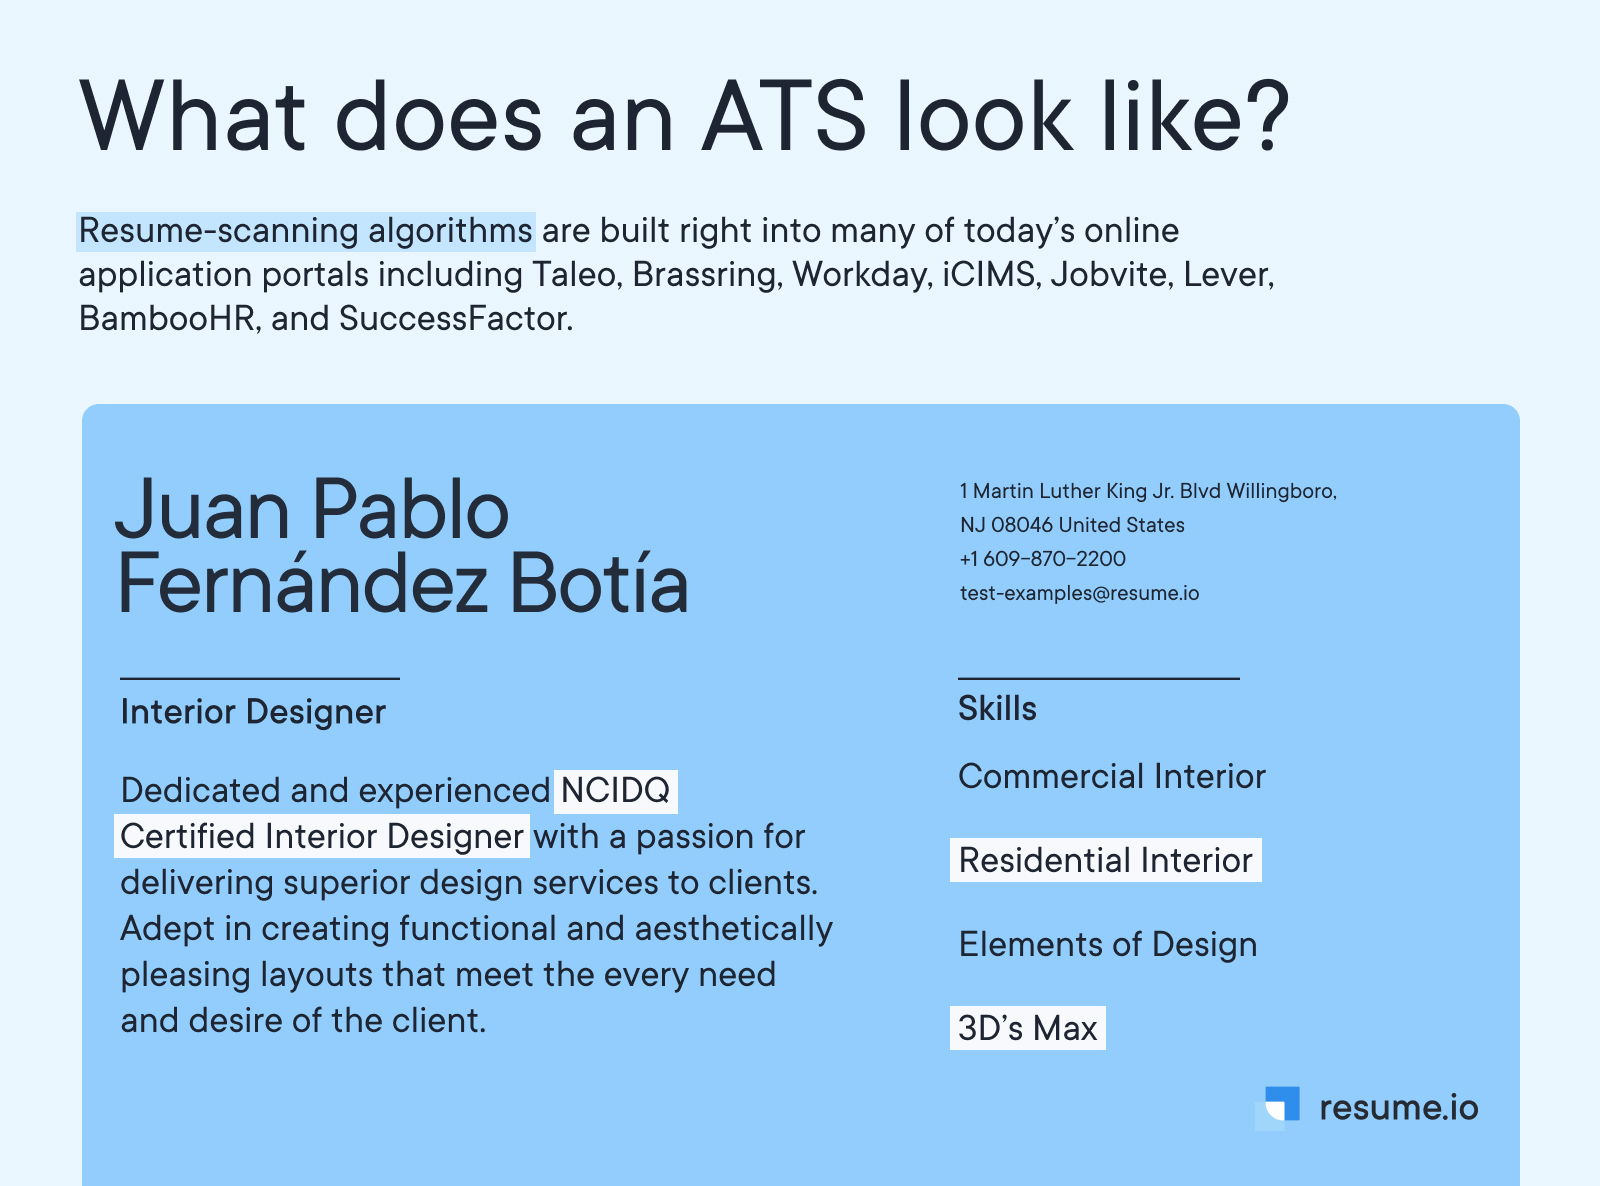 What does an ATS look like?